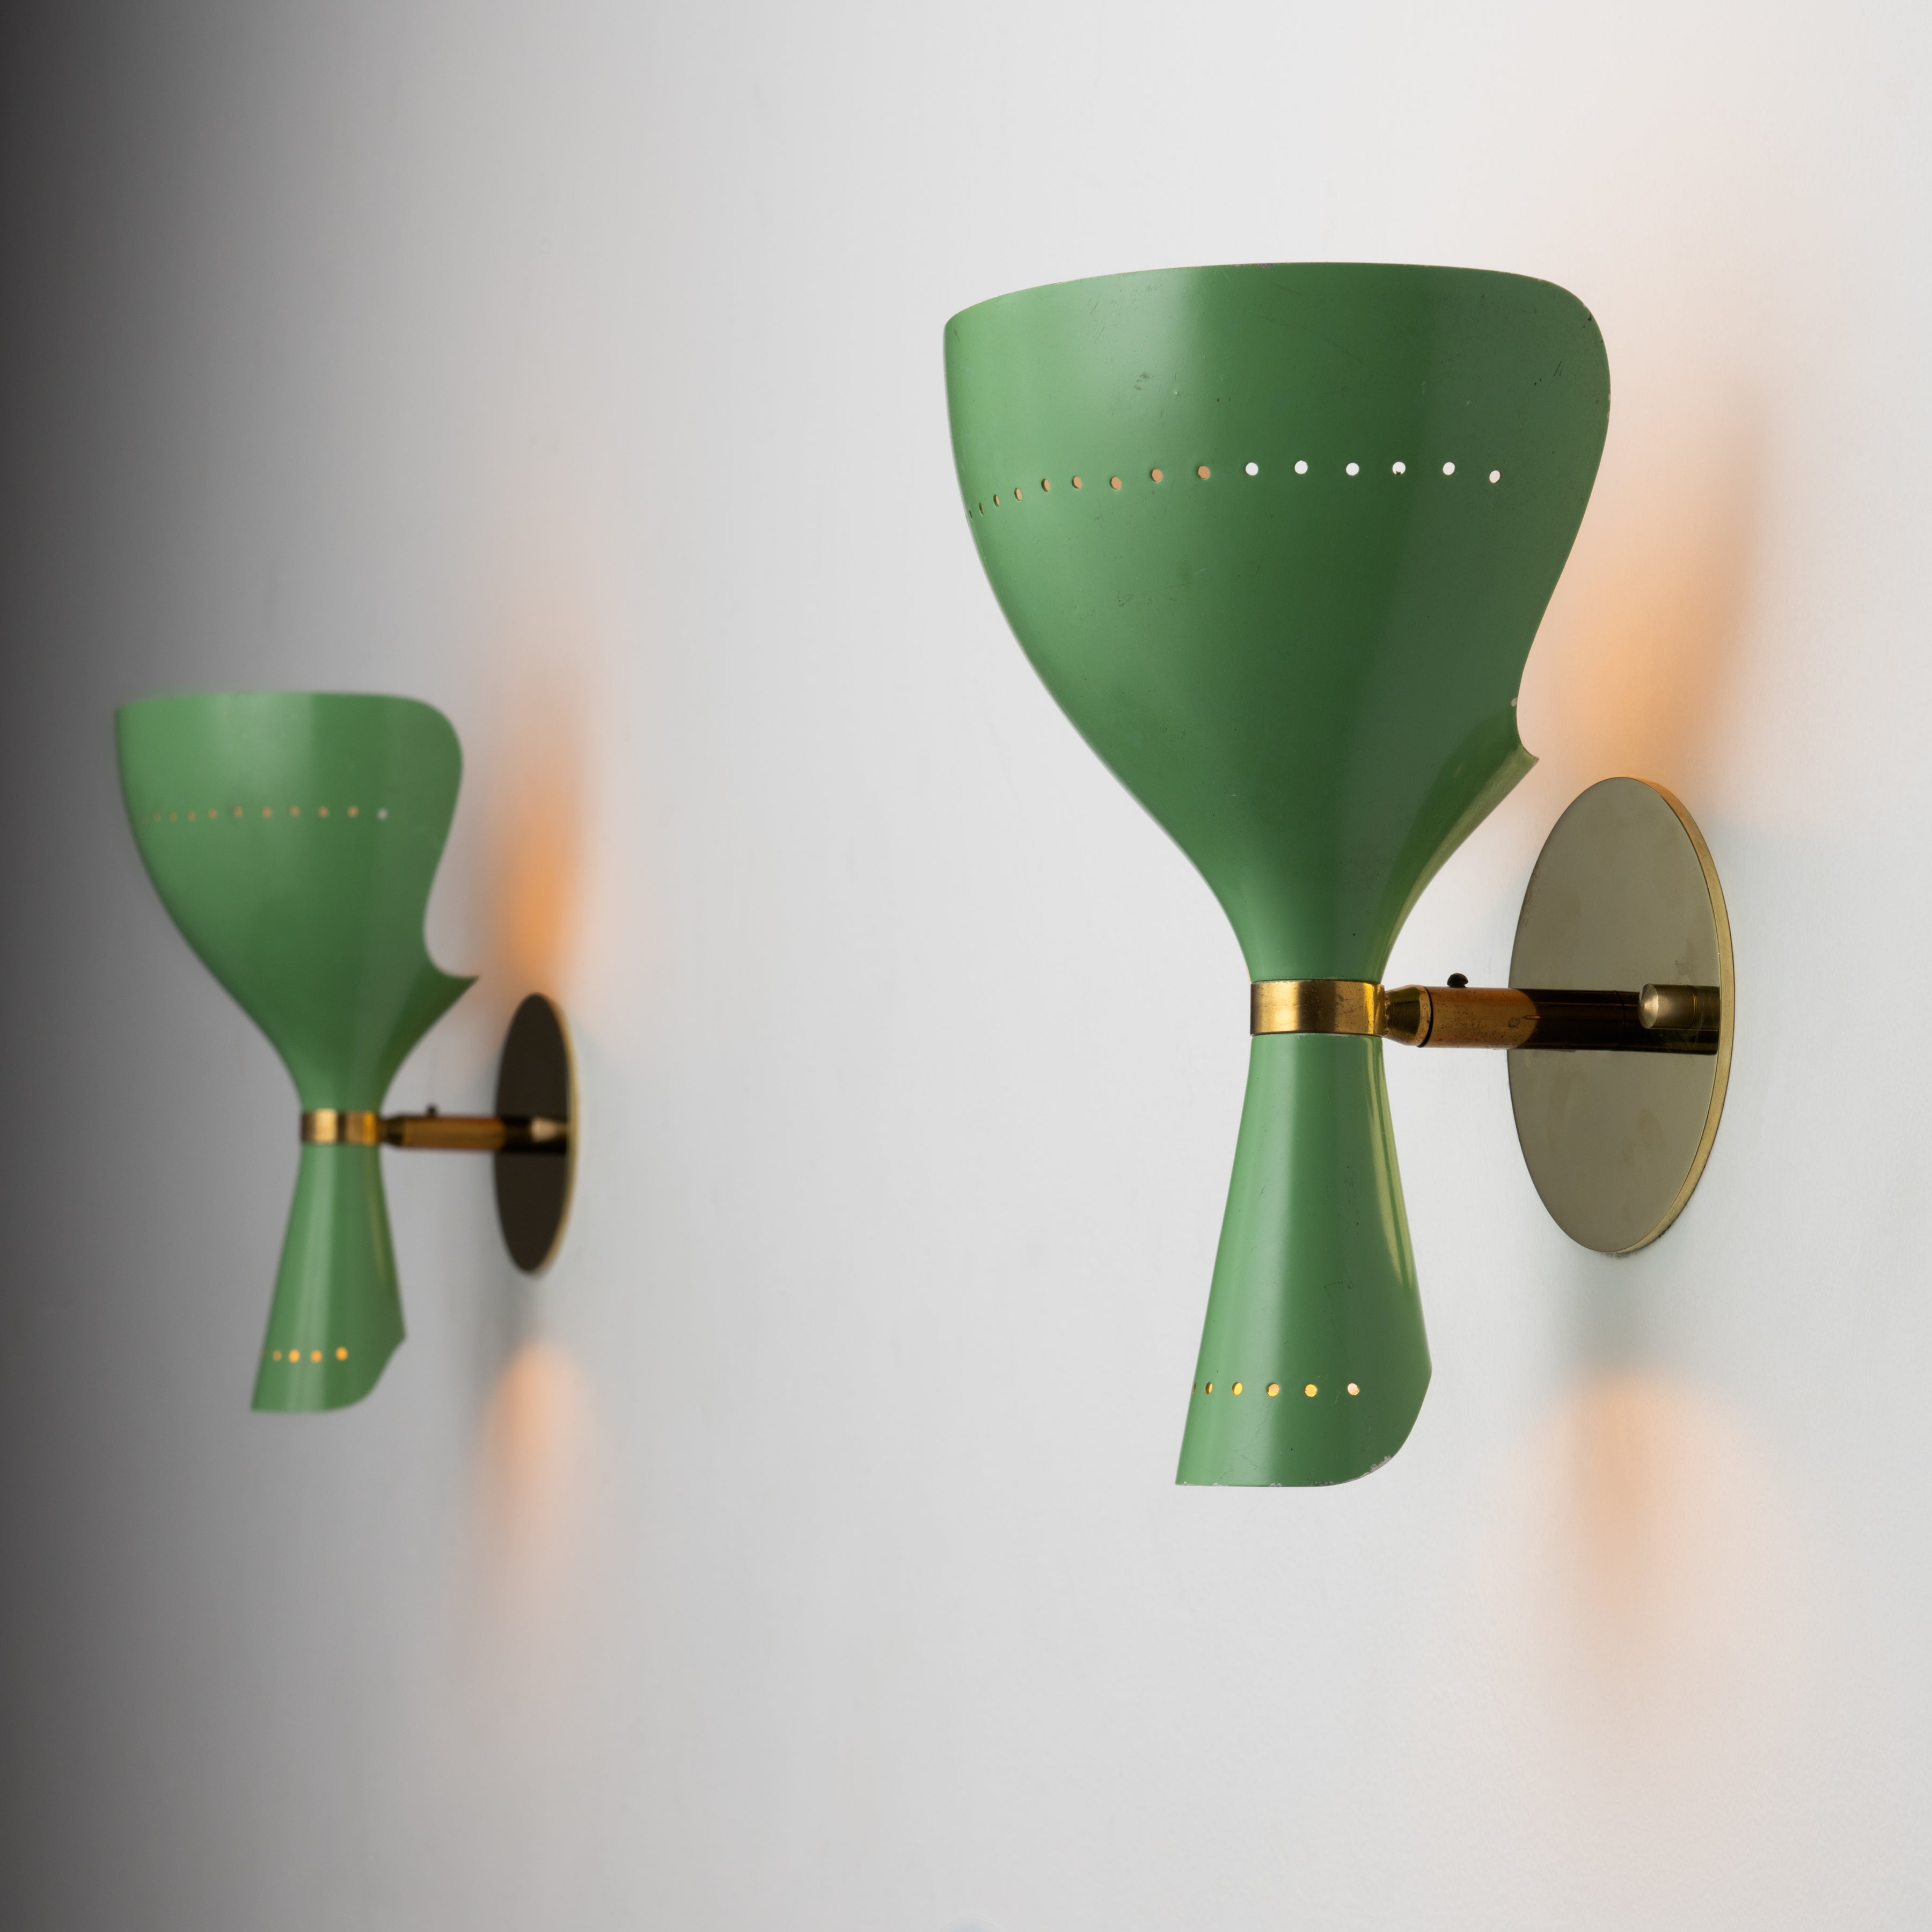 Pair of Sconces by Lumen. Designed and manufactured in Italy, circa the 1950s. These lamps feature a double headed conic design that provides a soft vertical illumination via two separate bulbs. Holds one E14 socket type, adapted for the US. We